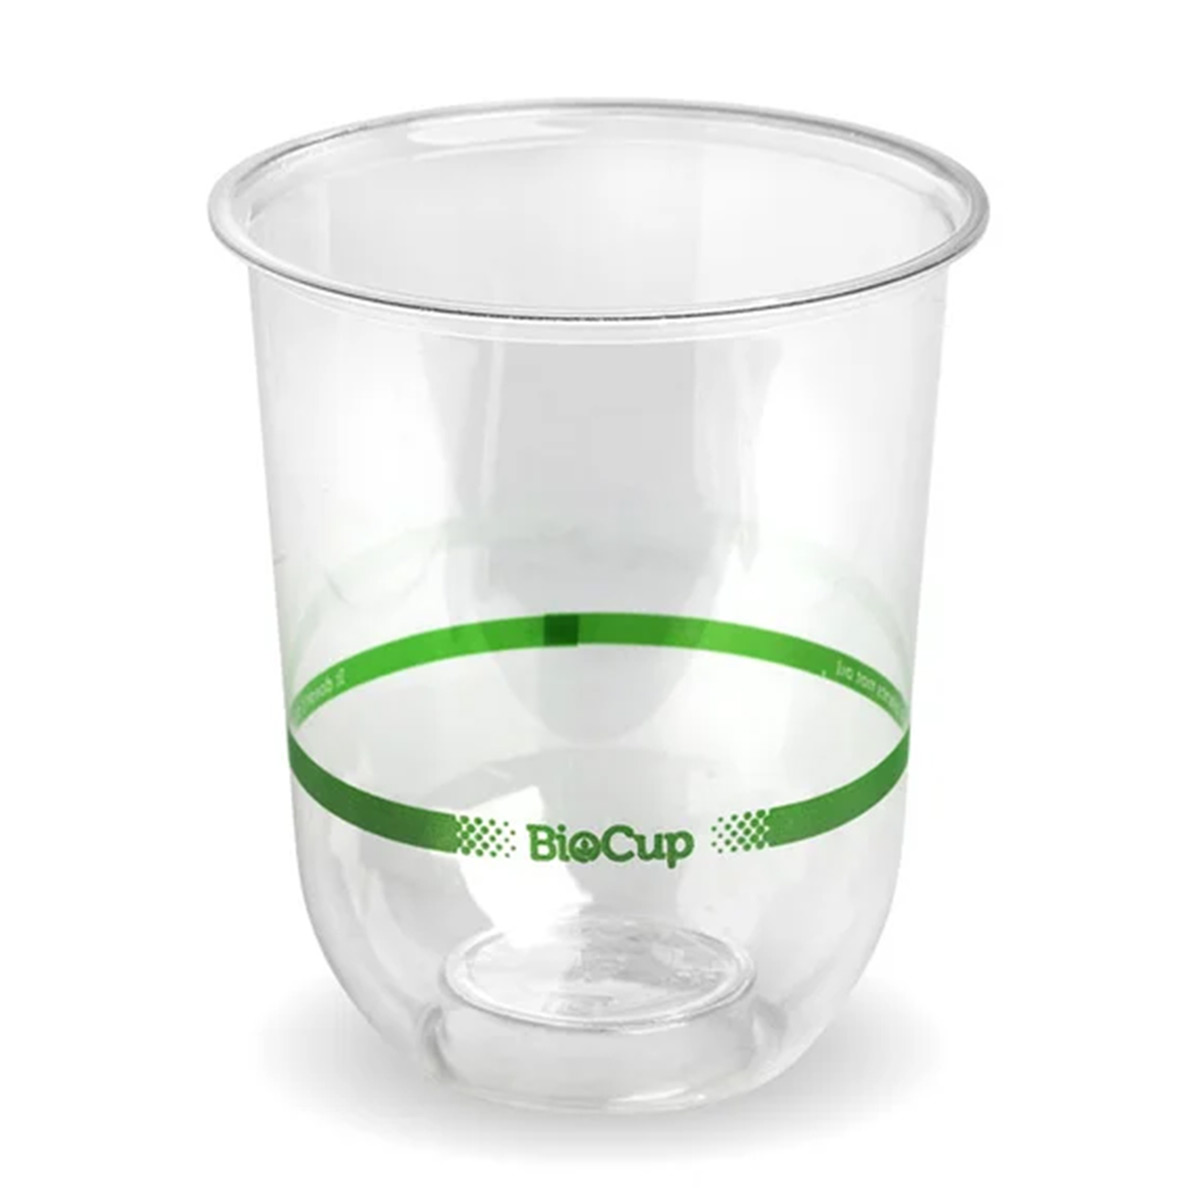 consumables-hospitality-packaging-biocup-clear-sturdy-cold-food-hot-drinks-tumbler-250ml-x-1000-cups-AS4736-certified-industrially-compostable-vjs-distributors-hawkes-bay-nz-Q250